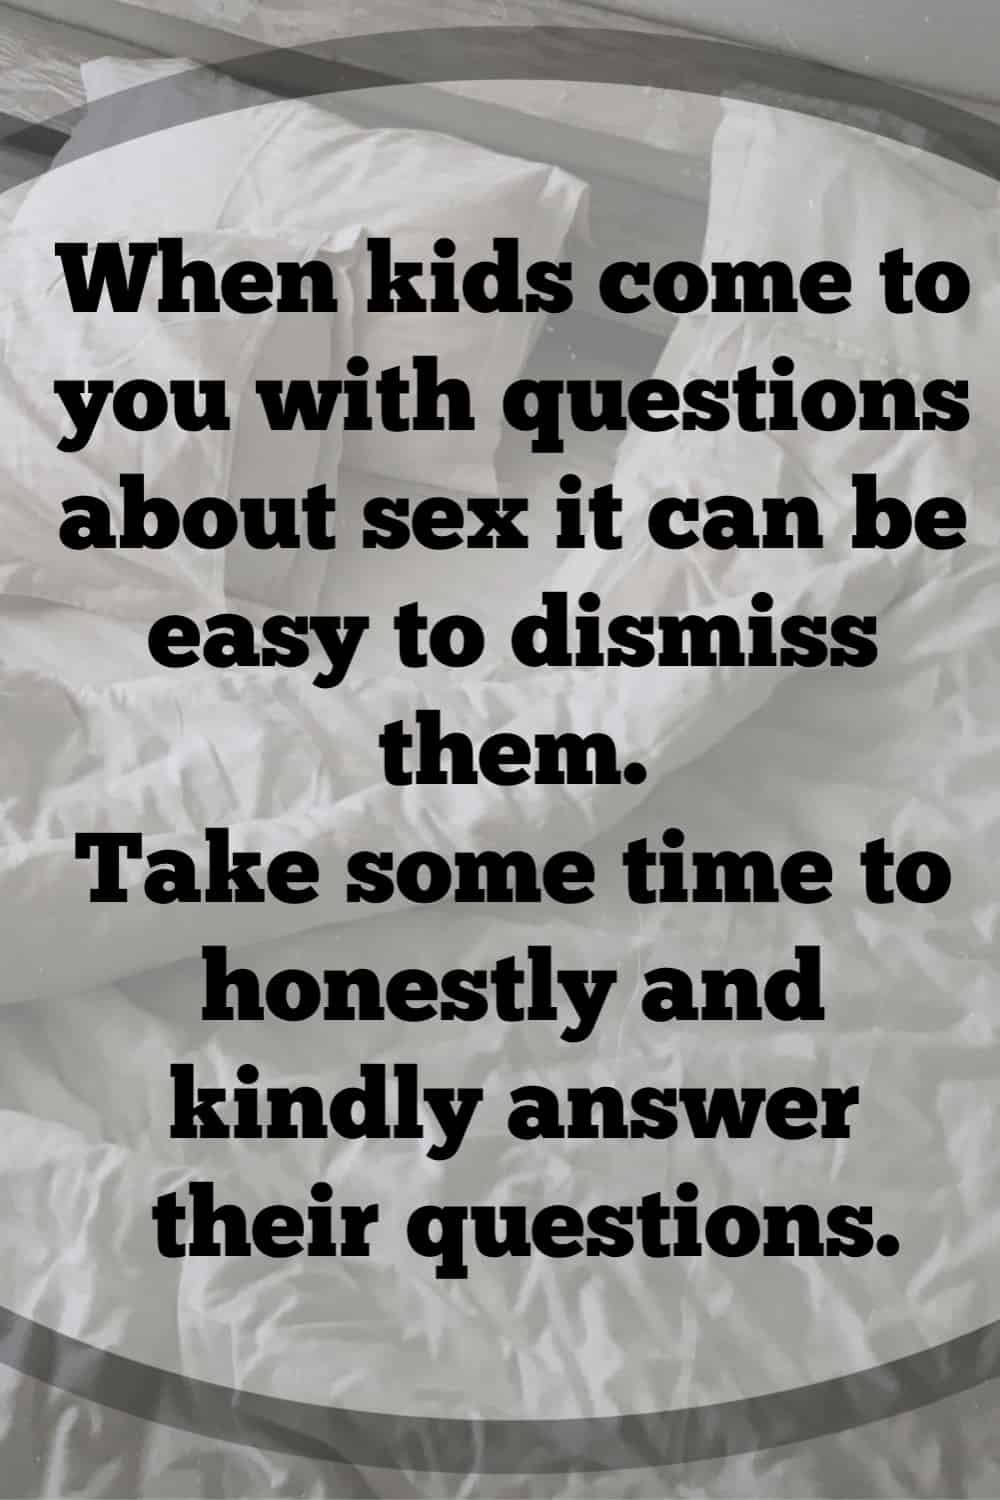 When kids come to you with questions about sex it can be easy to dismiss them. Take some time to honestly and kindly answer their questions.